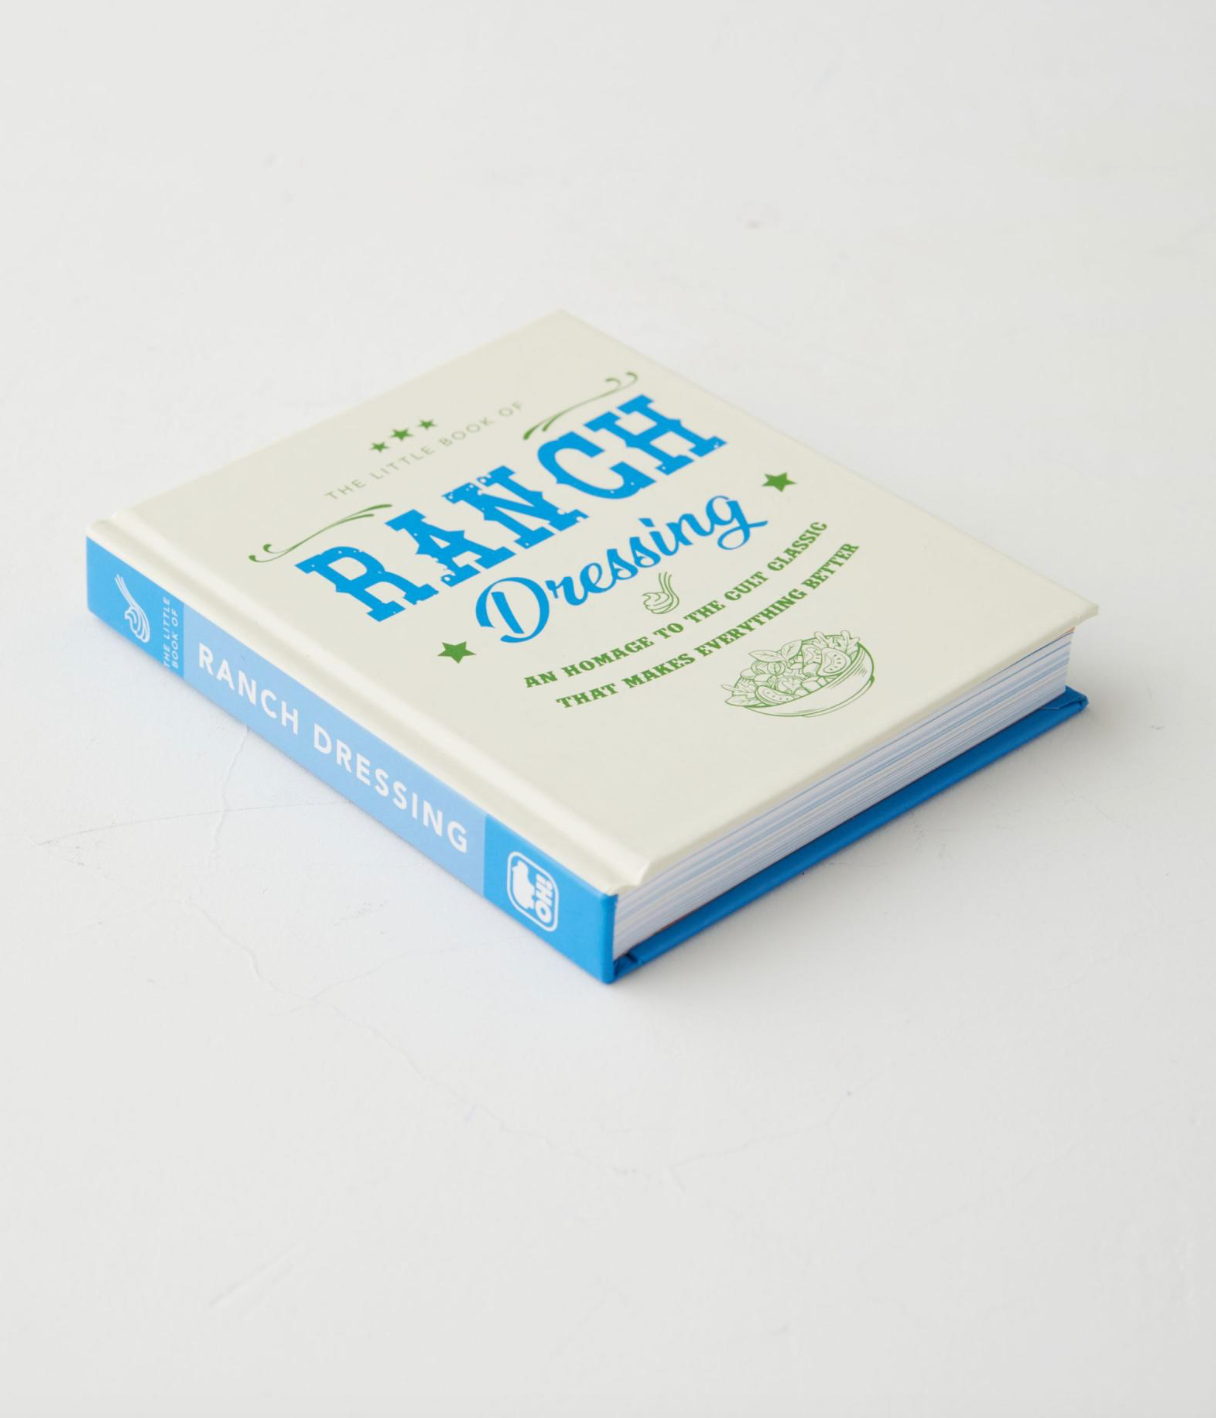 Little Book of Ranch Dressing